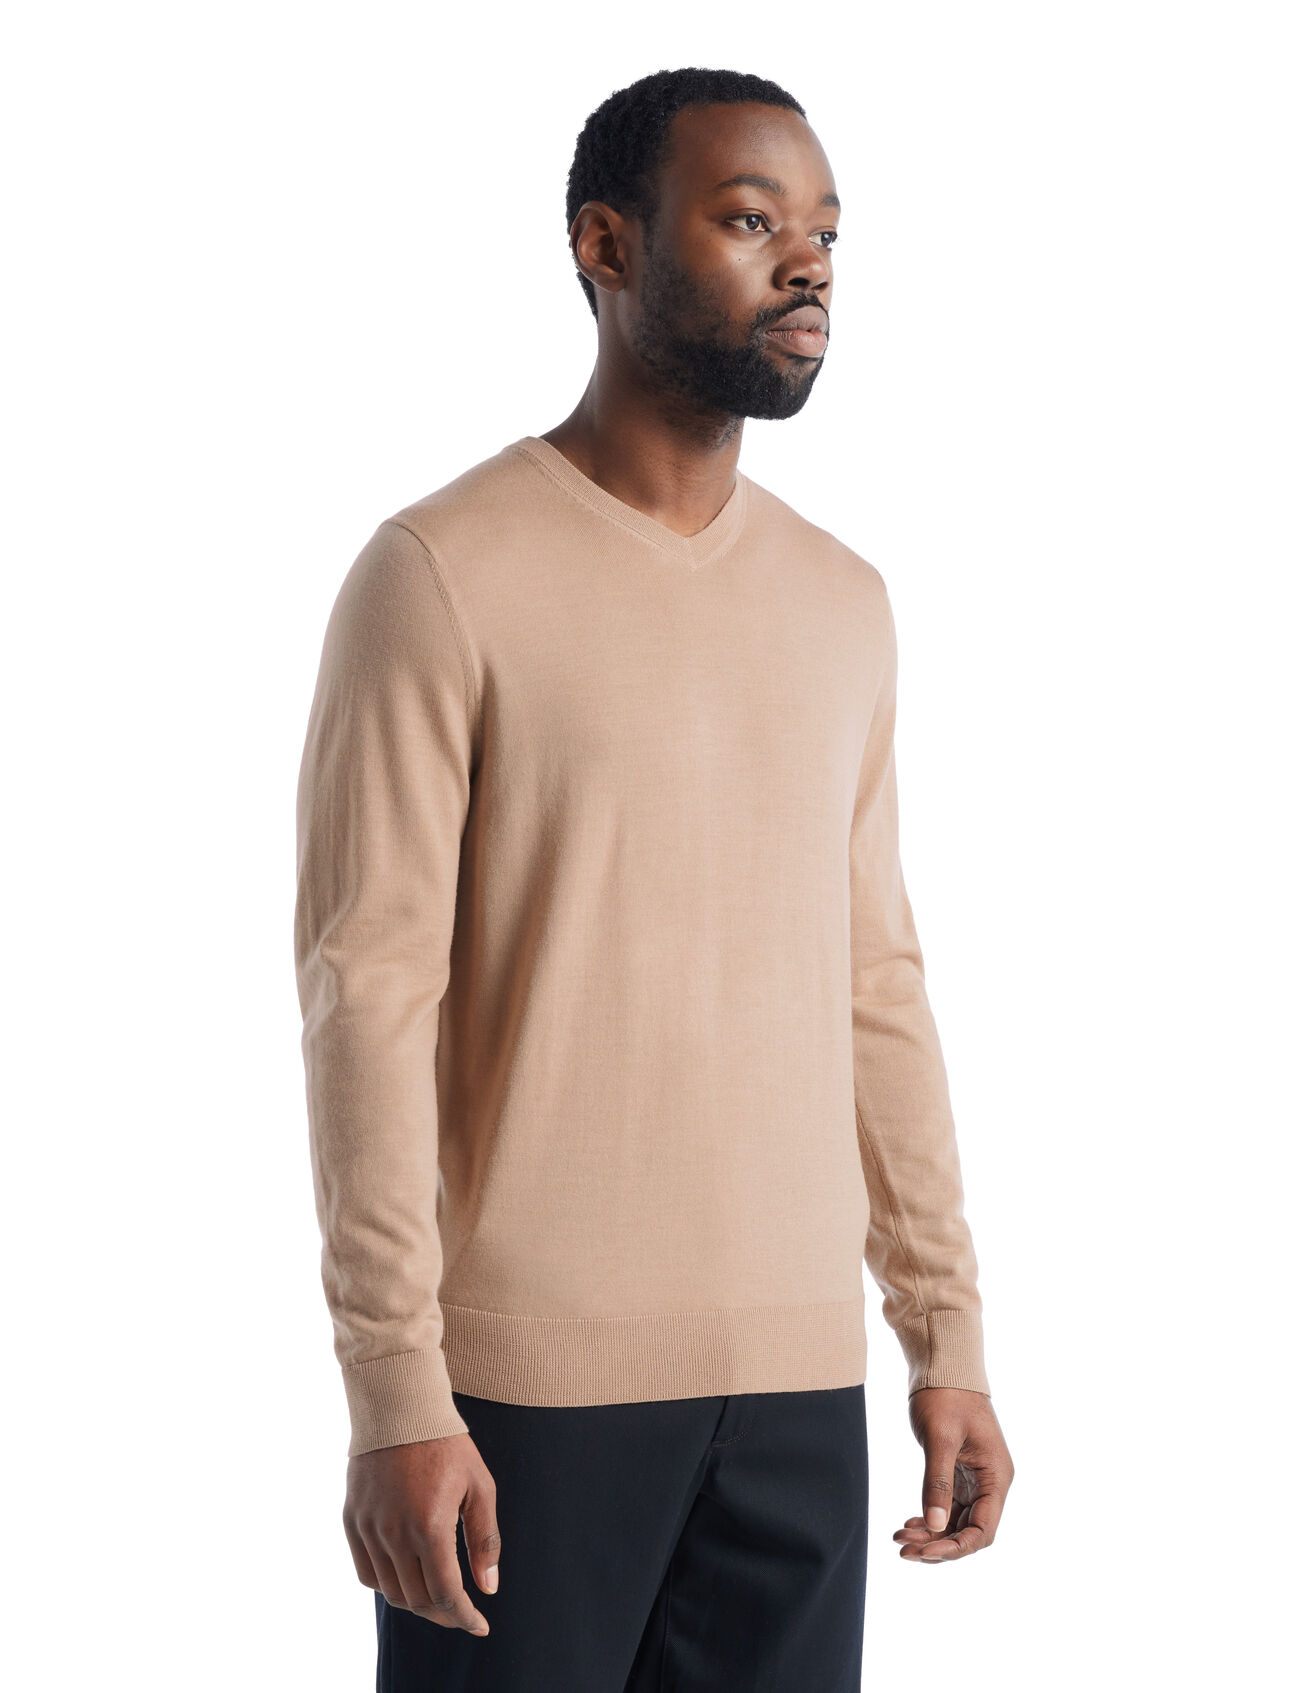 Mens Merino Wilcox Merino Long Sleeve Sweater A classic everyday sweater made with ultra-fine gauge merino wool for unparalleled softness, the Wilcox Long Sleeve V Sweater is perfect for days when you need a light extra layer.